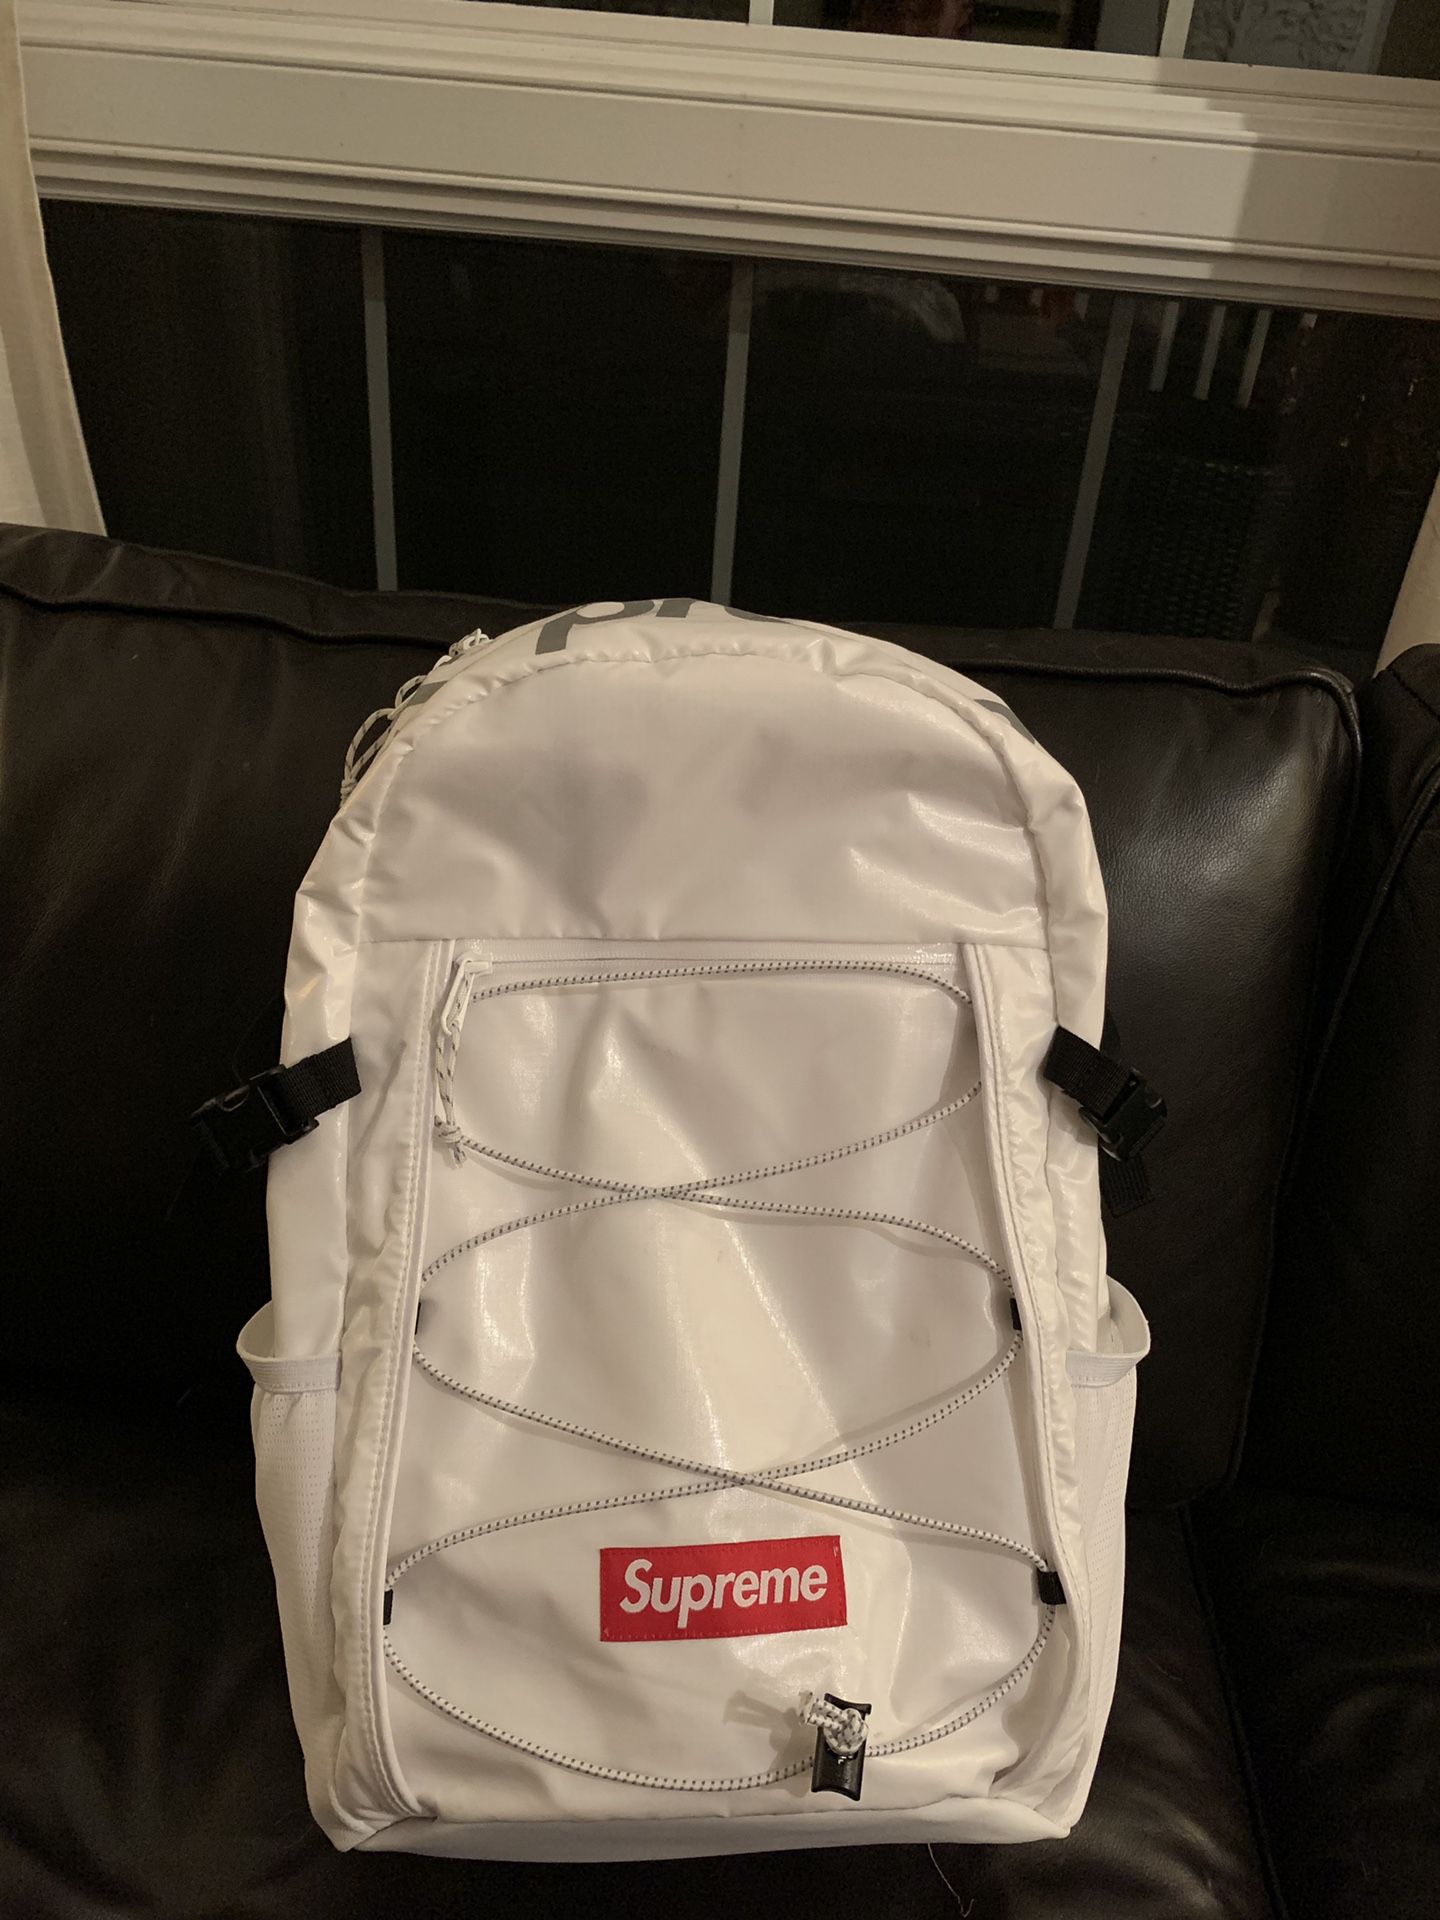 Supreme - Red Box Logo Canvas Backpack (White) – eluXive